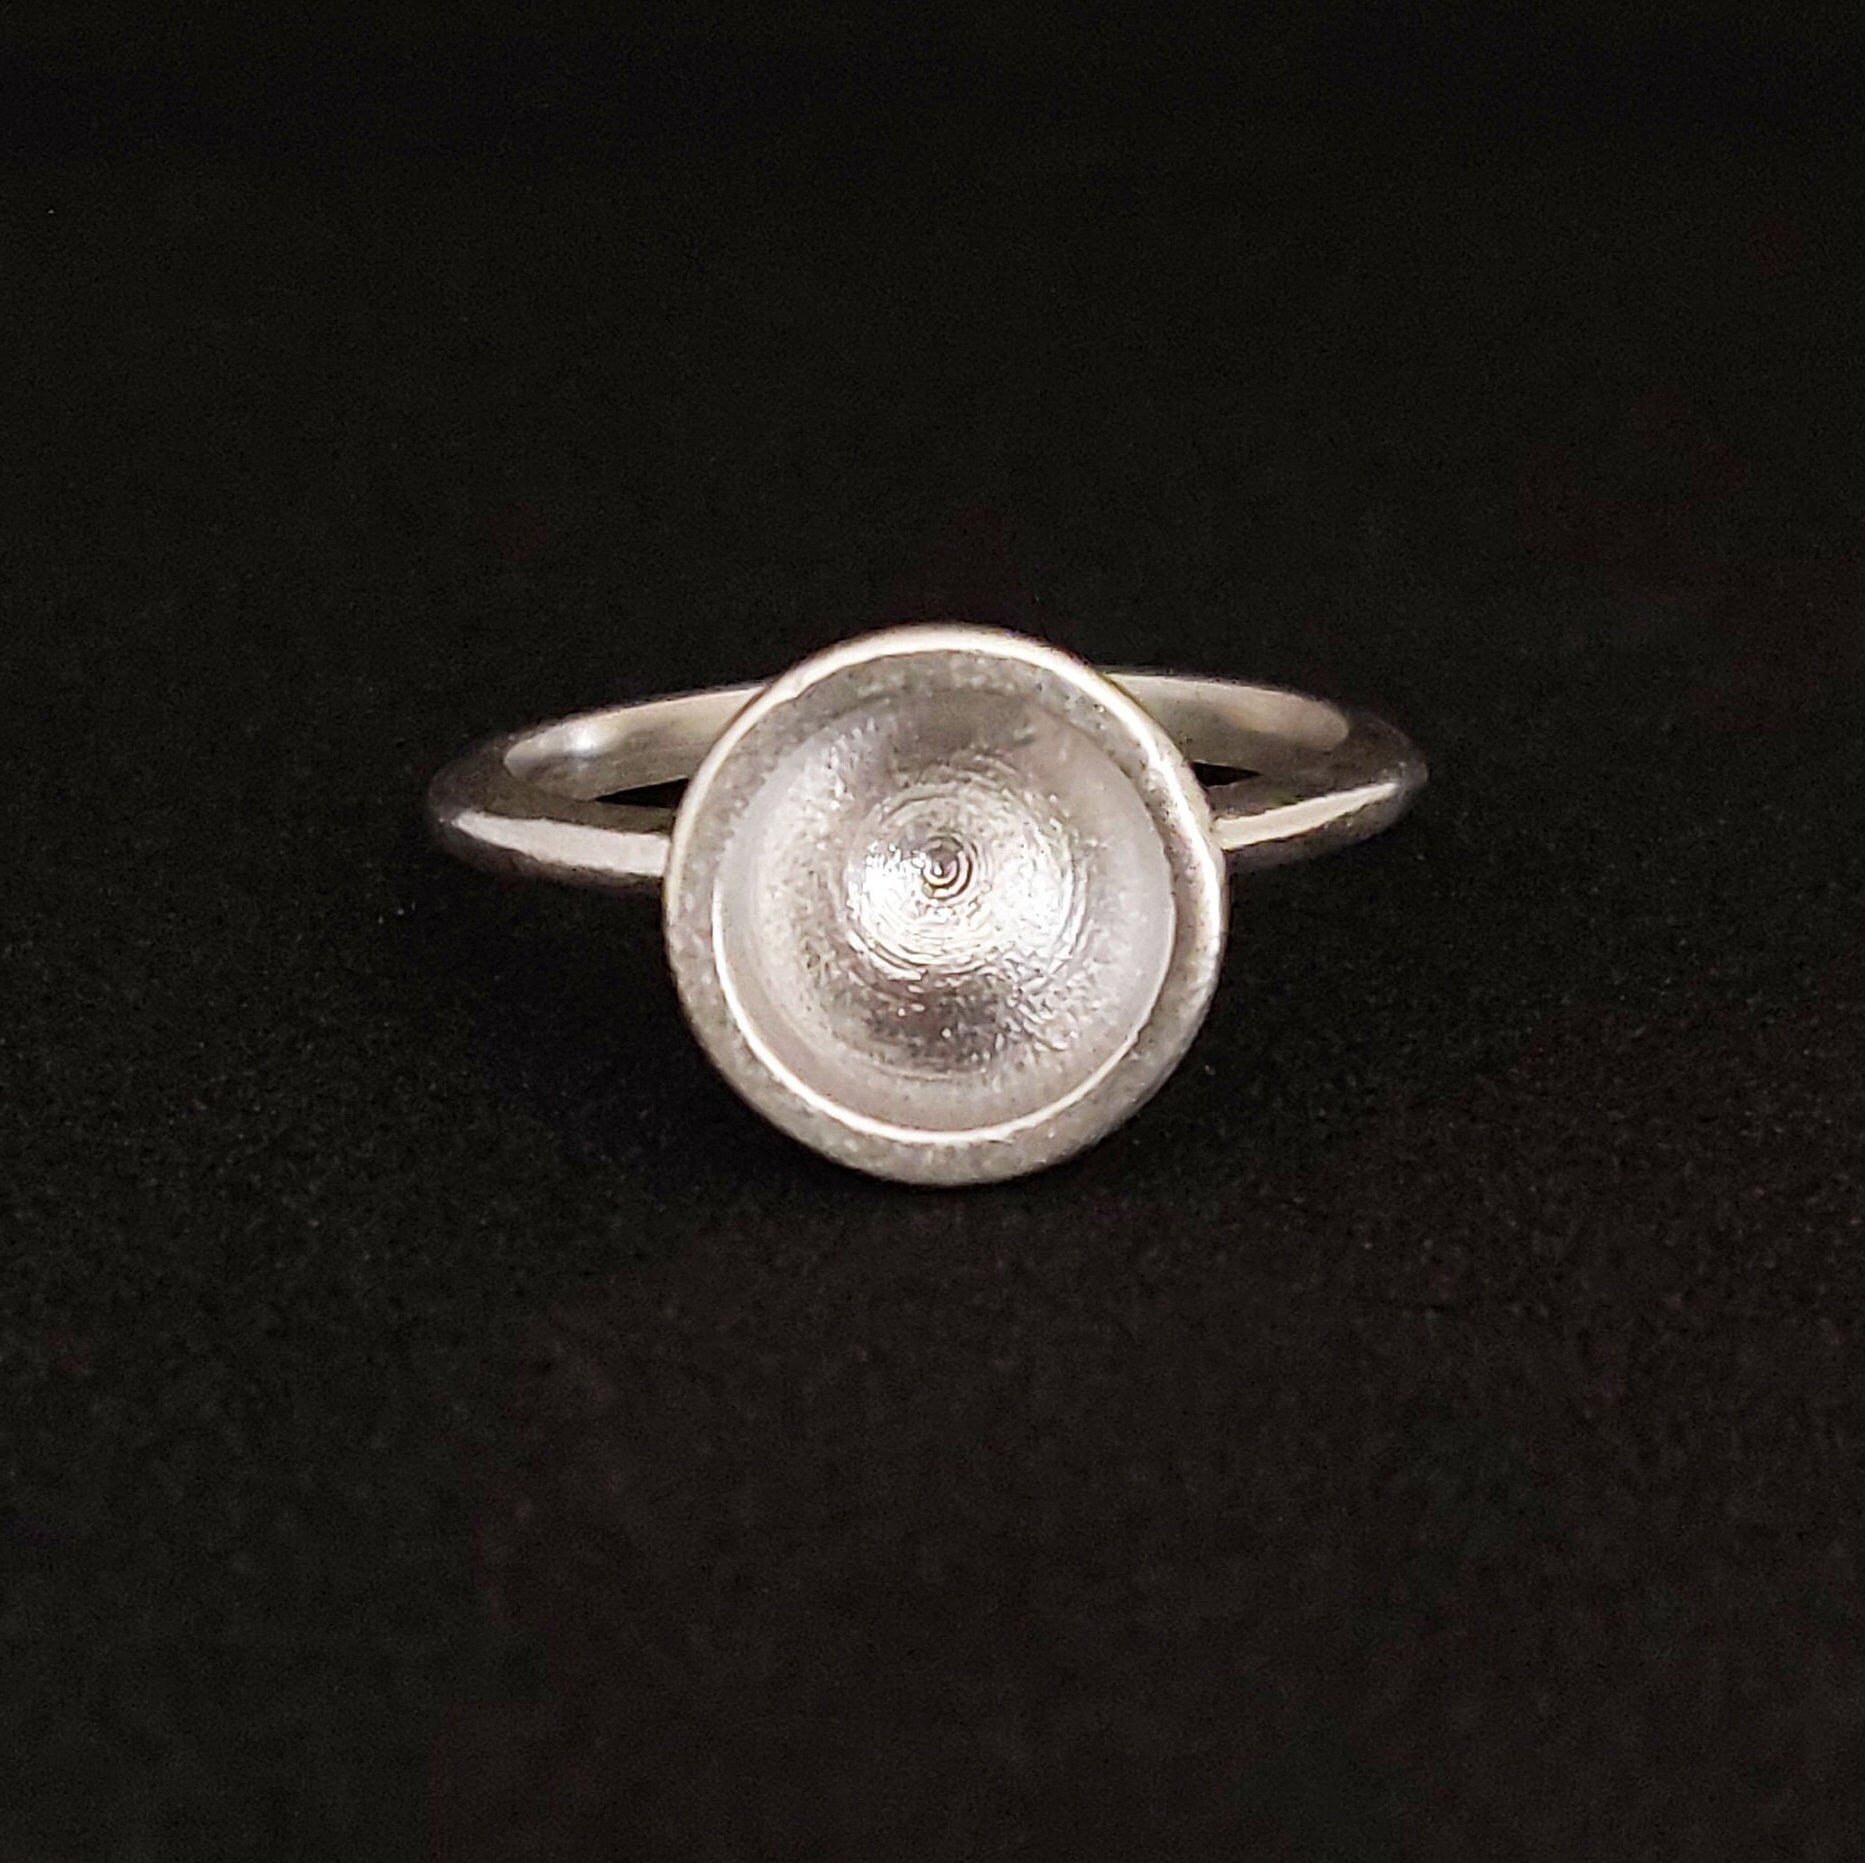 8mm Silver Cup Bezel Ring Setting. Round Sealed Cup Rubover Bezel Ring. Silver Bezel Stacking Ring. 9ct Yellow Gold Cup Bezel Stacking Ring.